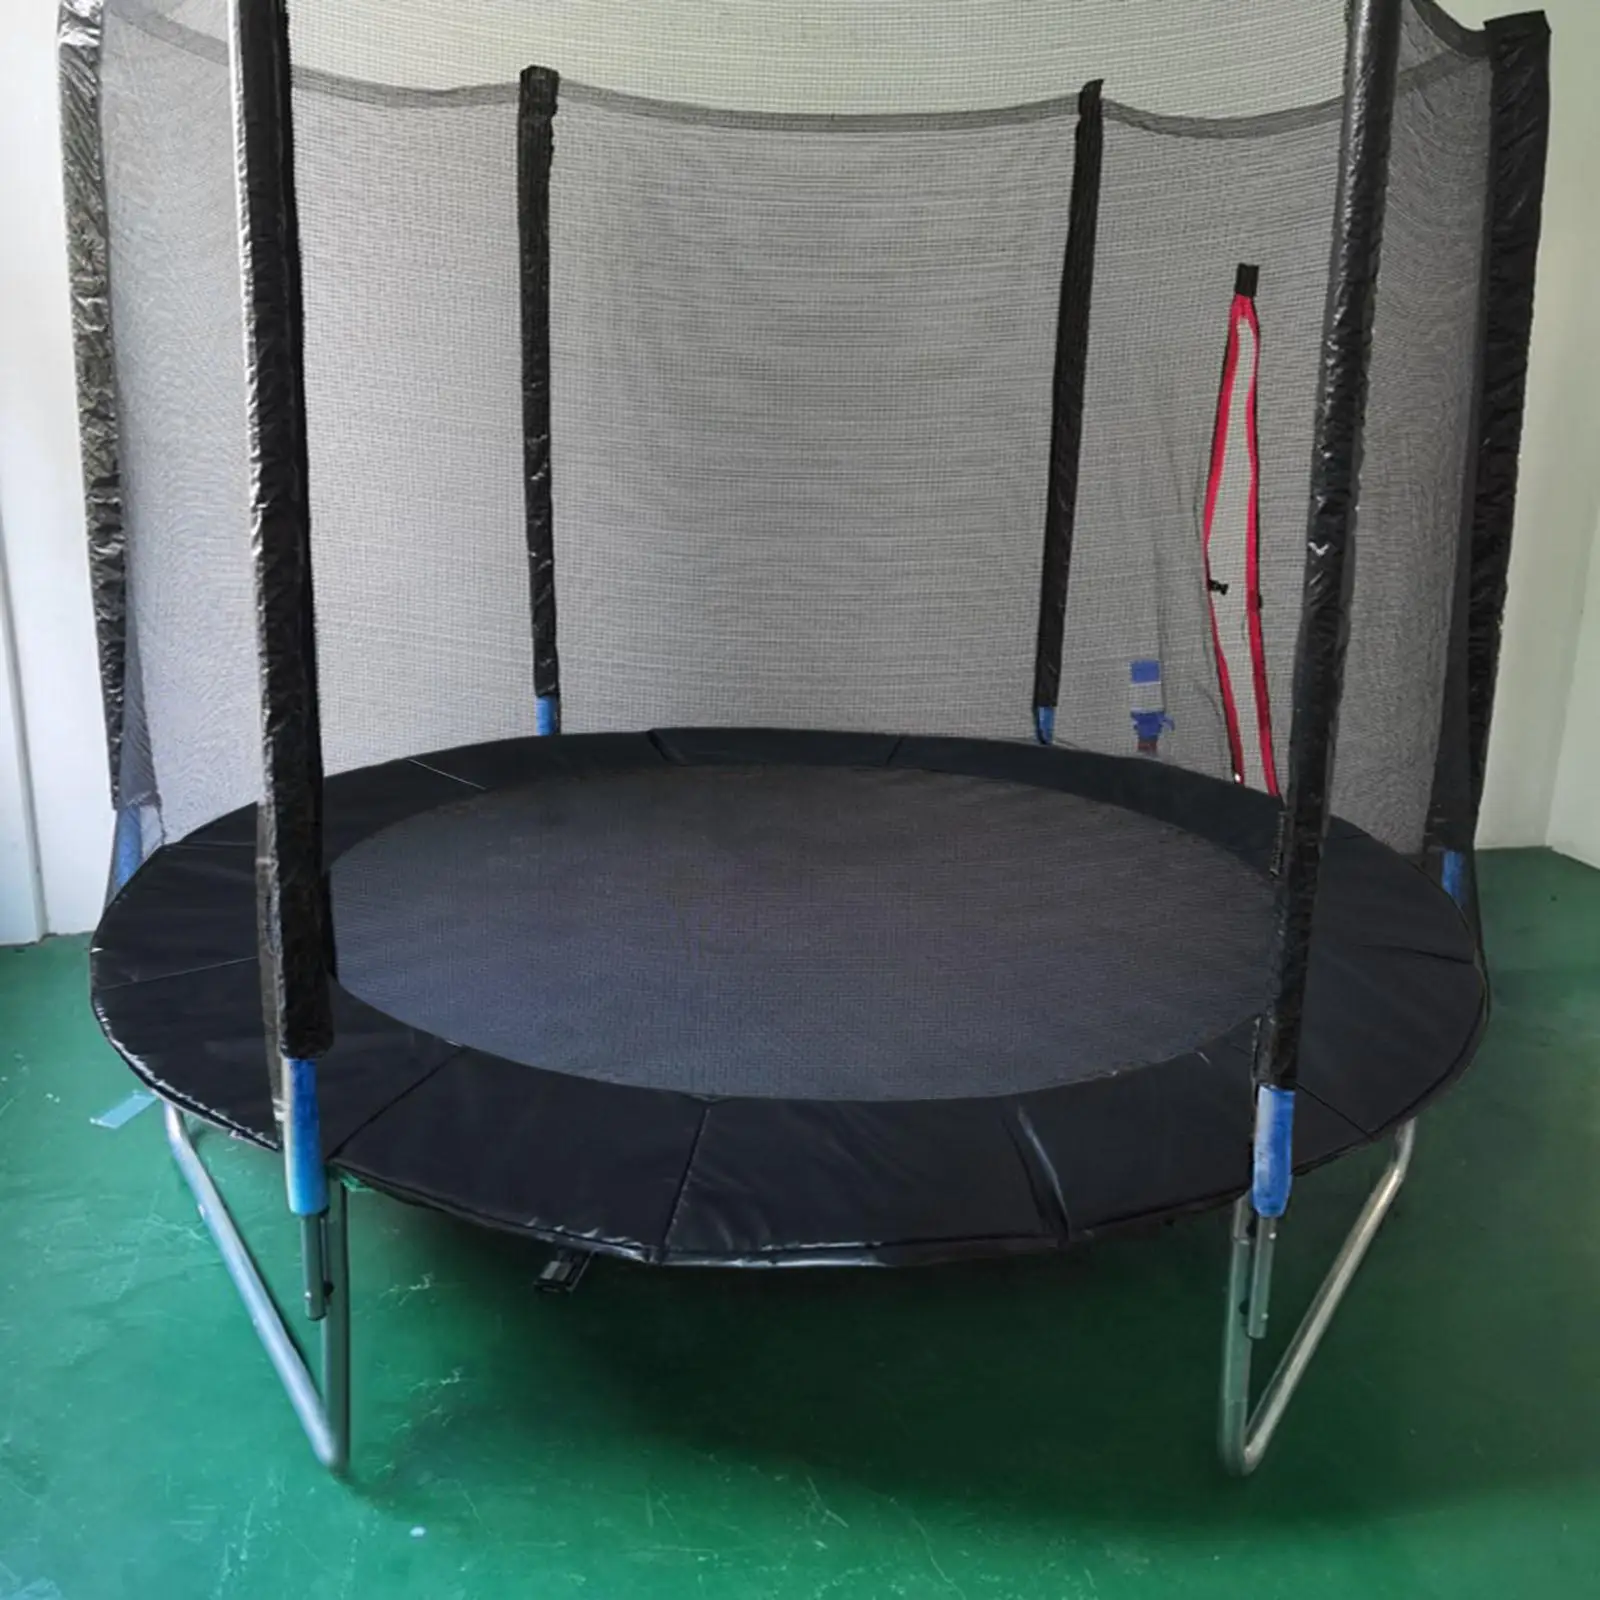 Trampoline Spring Cover Waterproof Edge Protection Trampoline Edge Cover